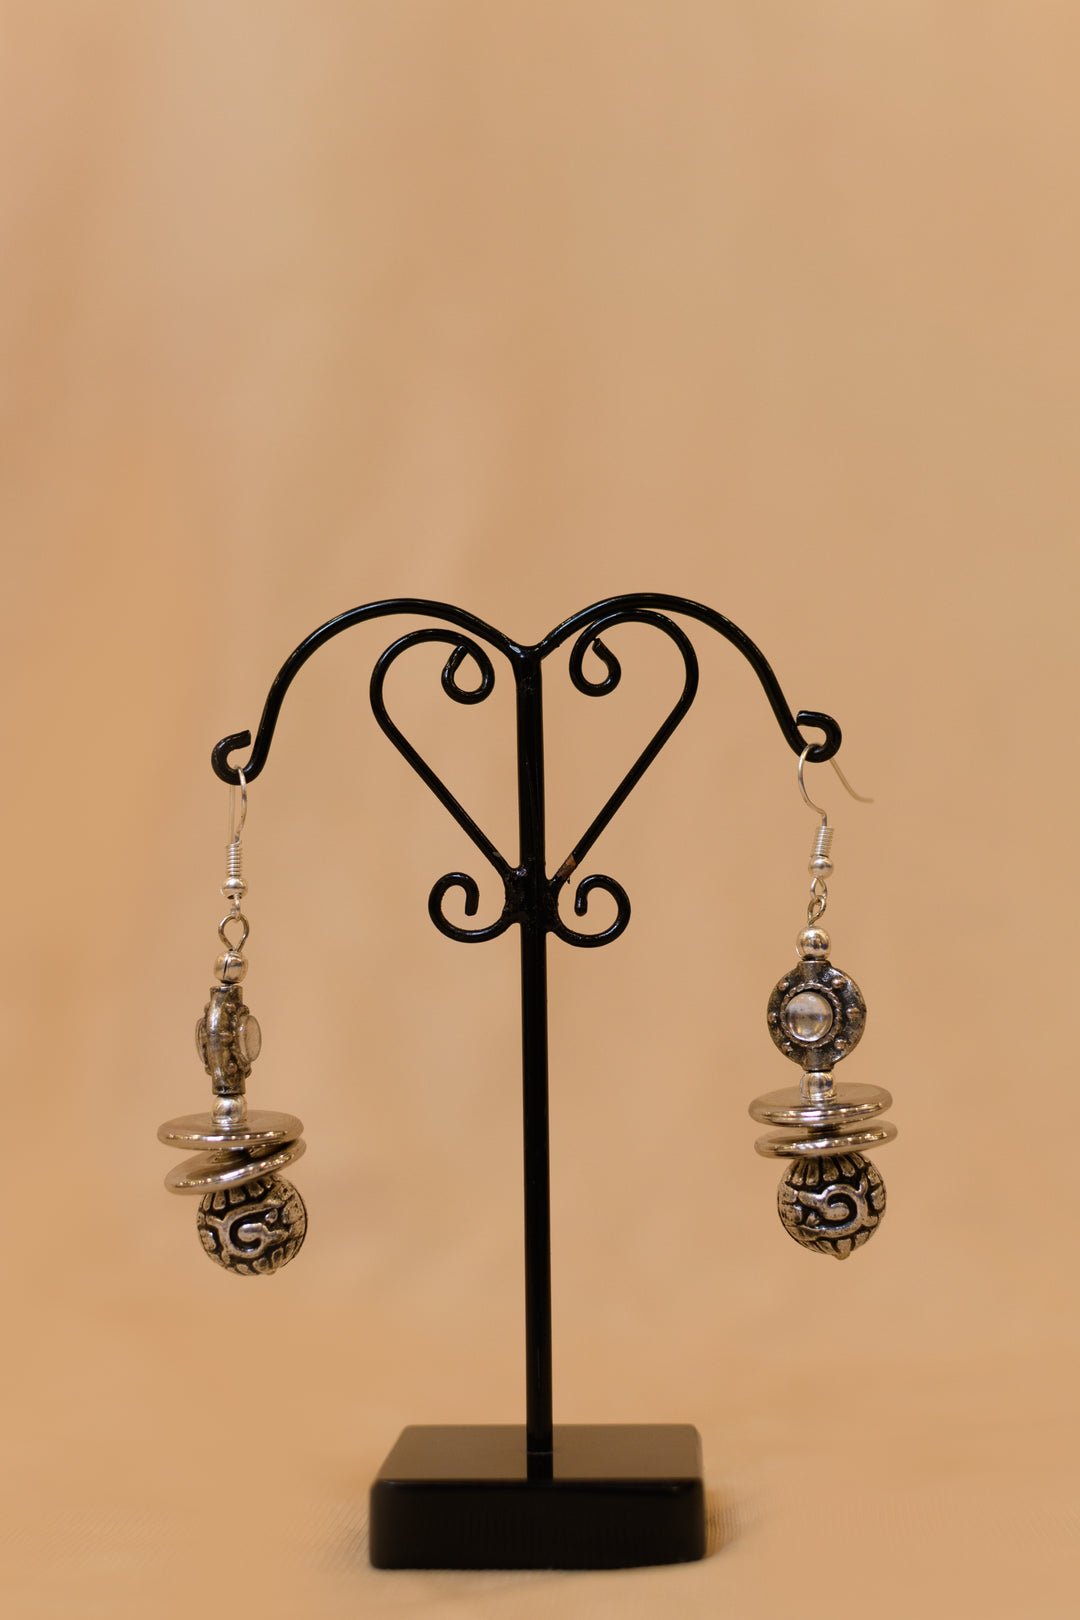 Metal Beads Earring Strung In Metal Wire With Metal Spacer Beads Between Them